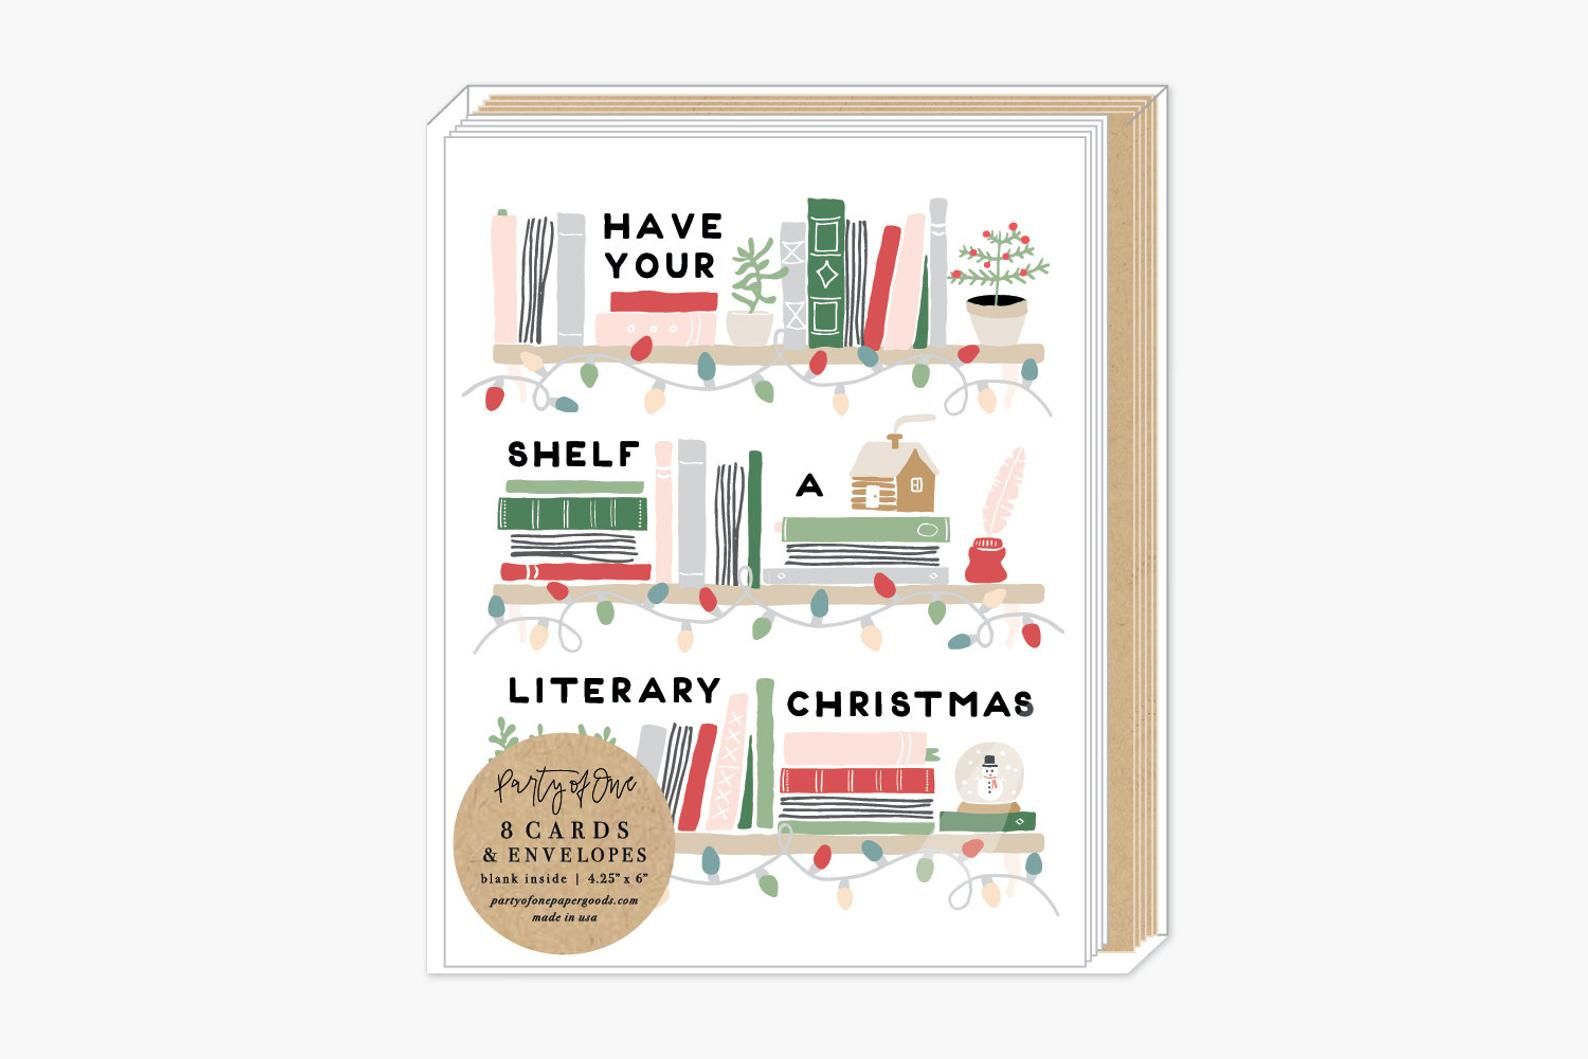 Have Your Shelf a Merry Little Christmas cards